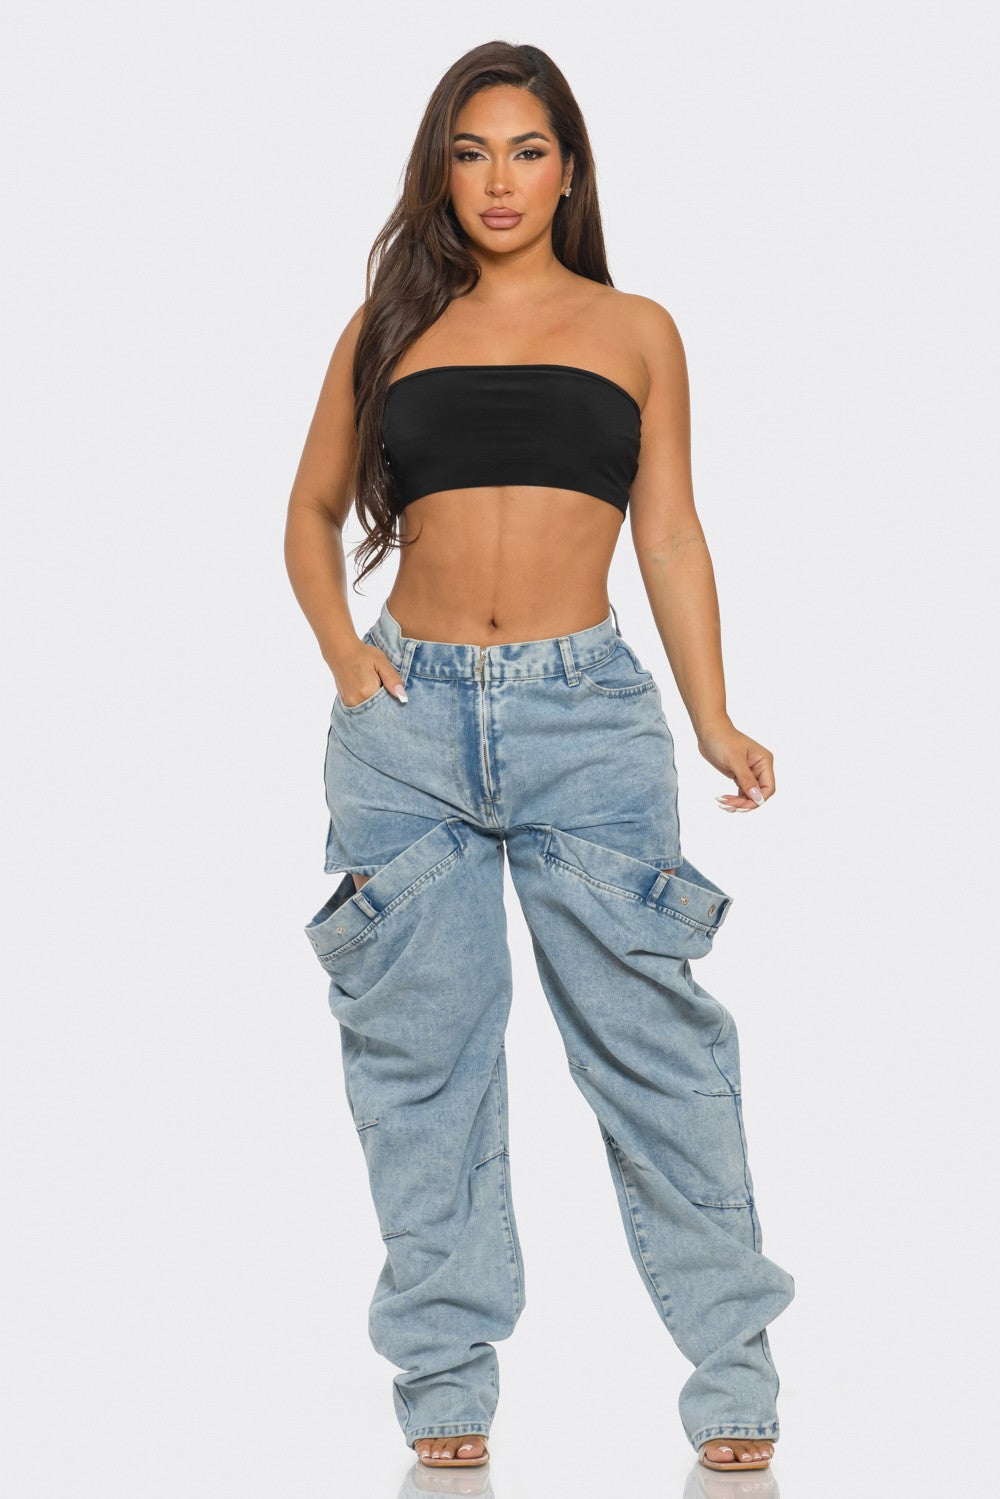 Lesella Jeans Ships 5/31/24